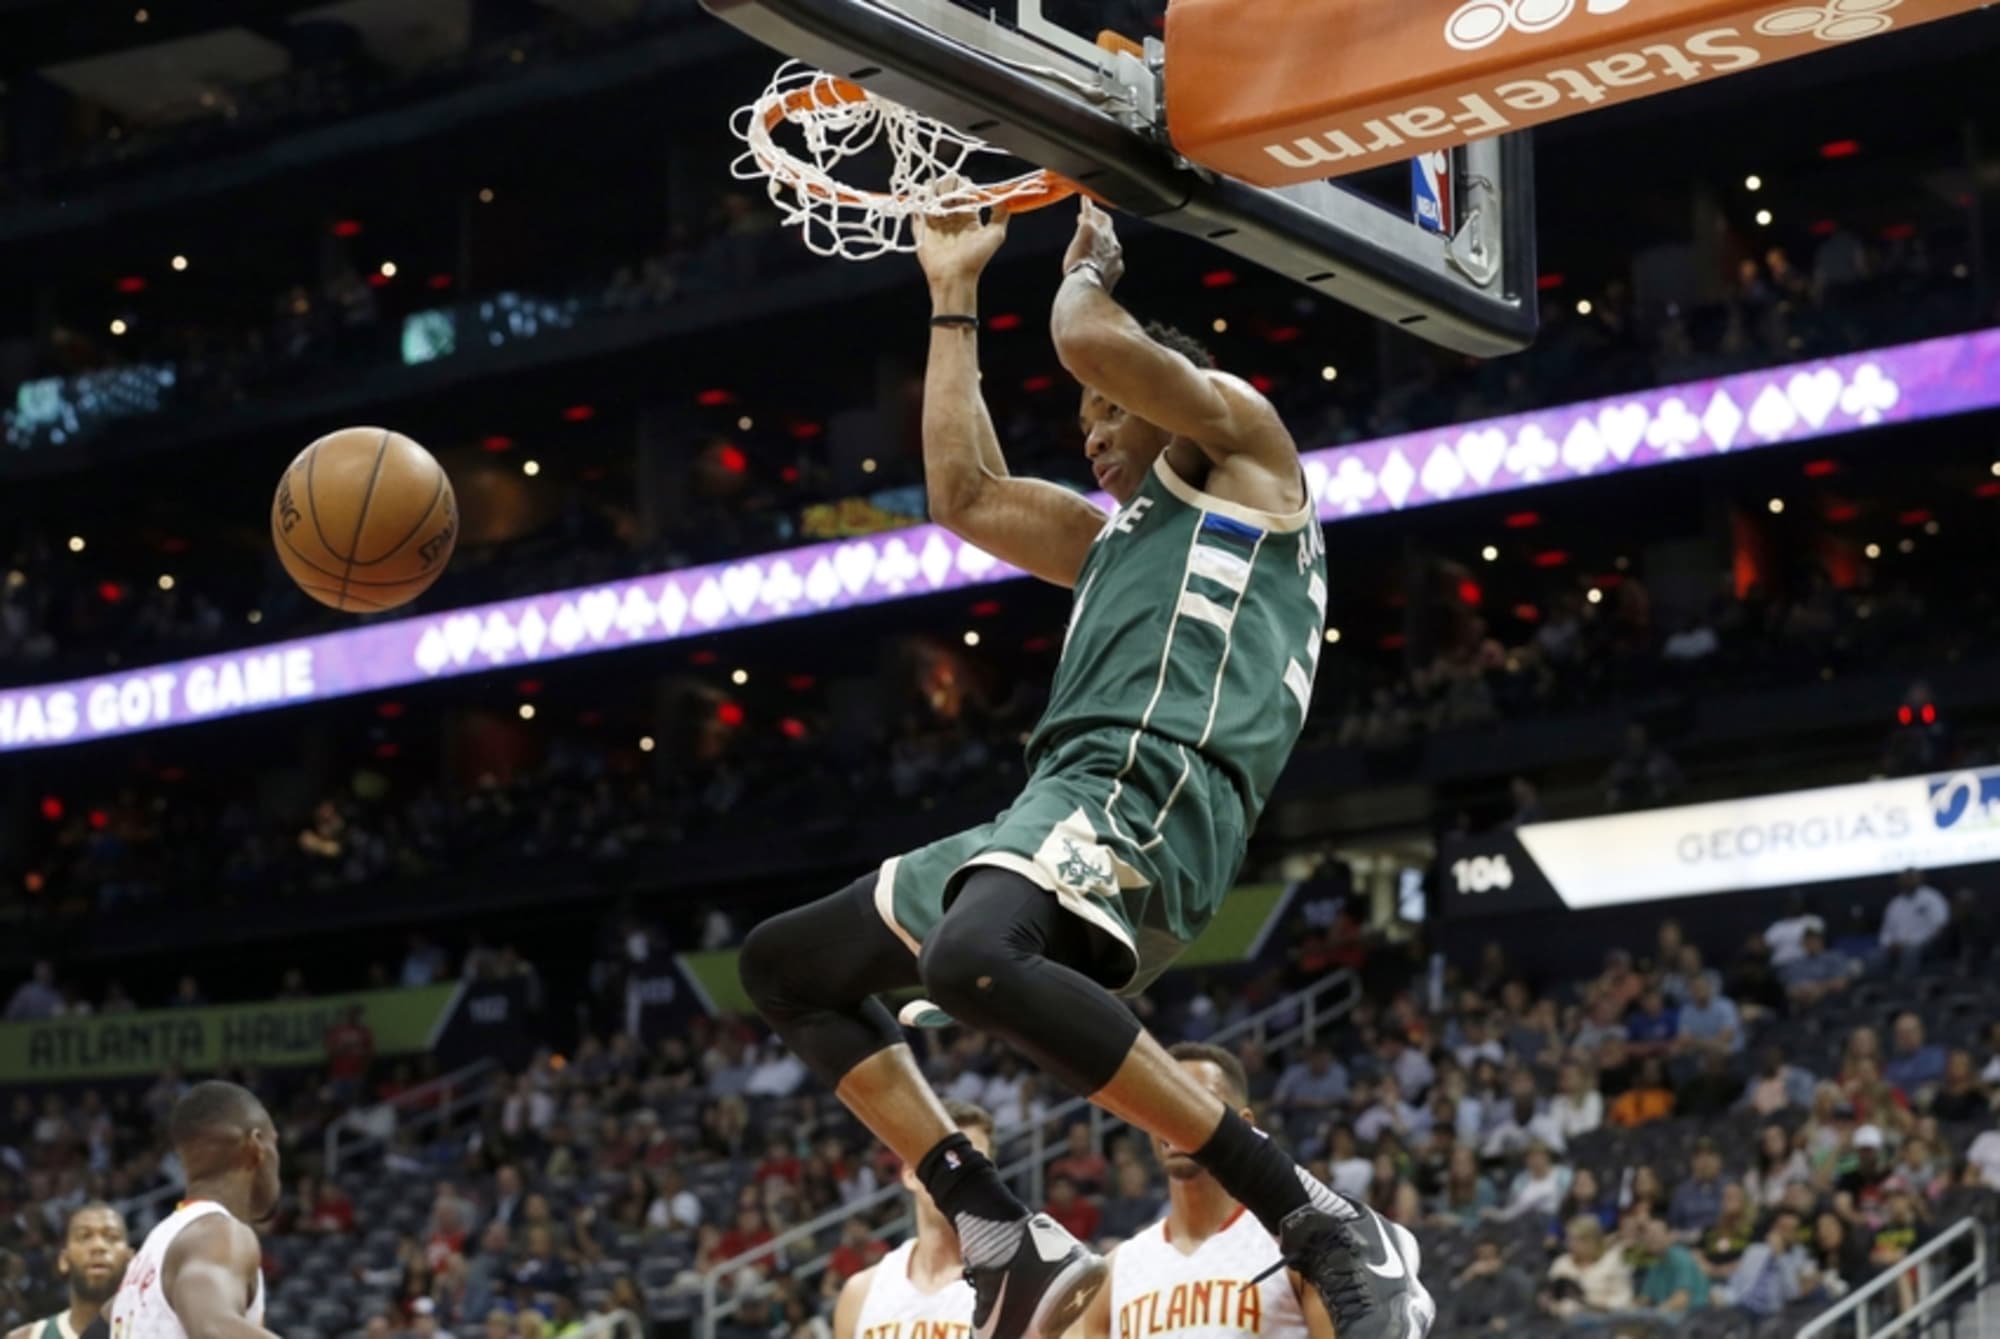 Best combo of skills and athleticism - where does The Greek Freak sit?